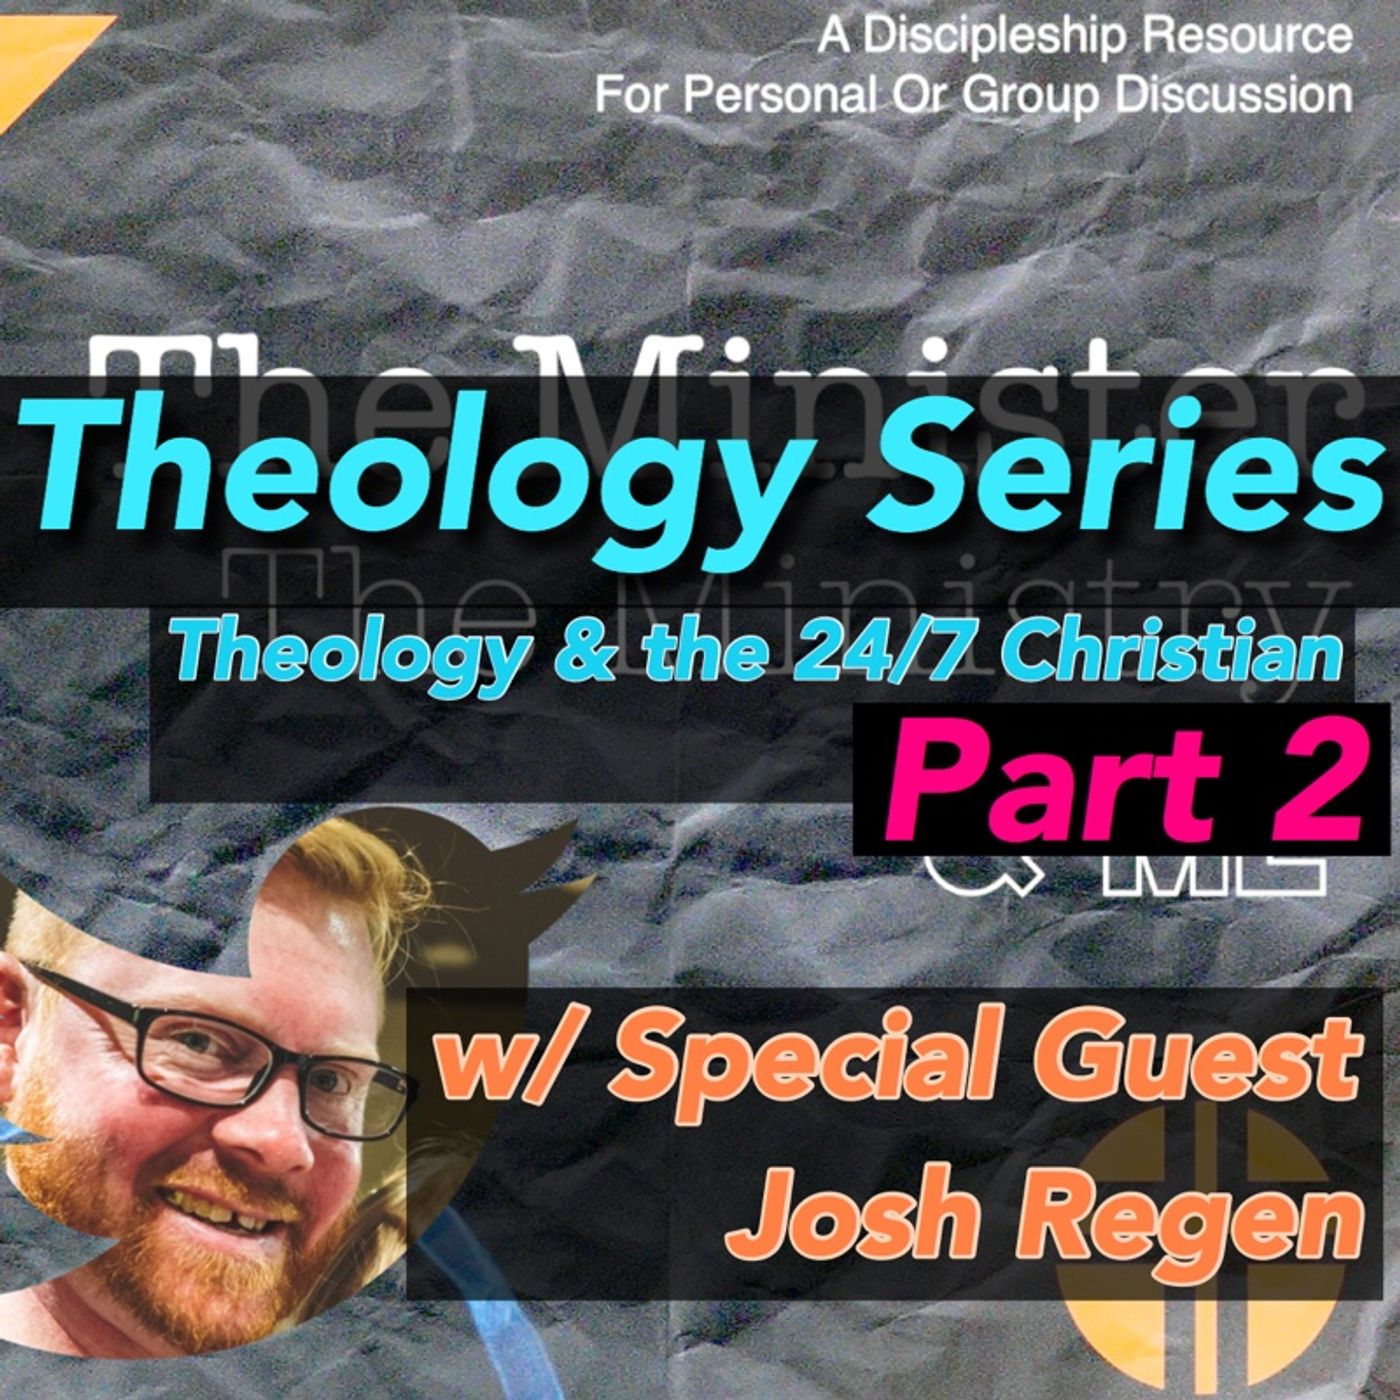 Theology & The 24/7 Christian - Part 2 w/ Special Guest Josh Ragan